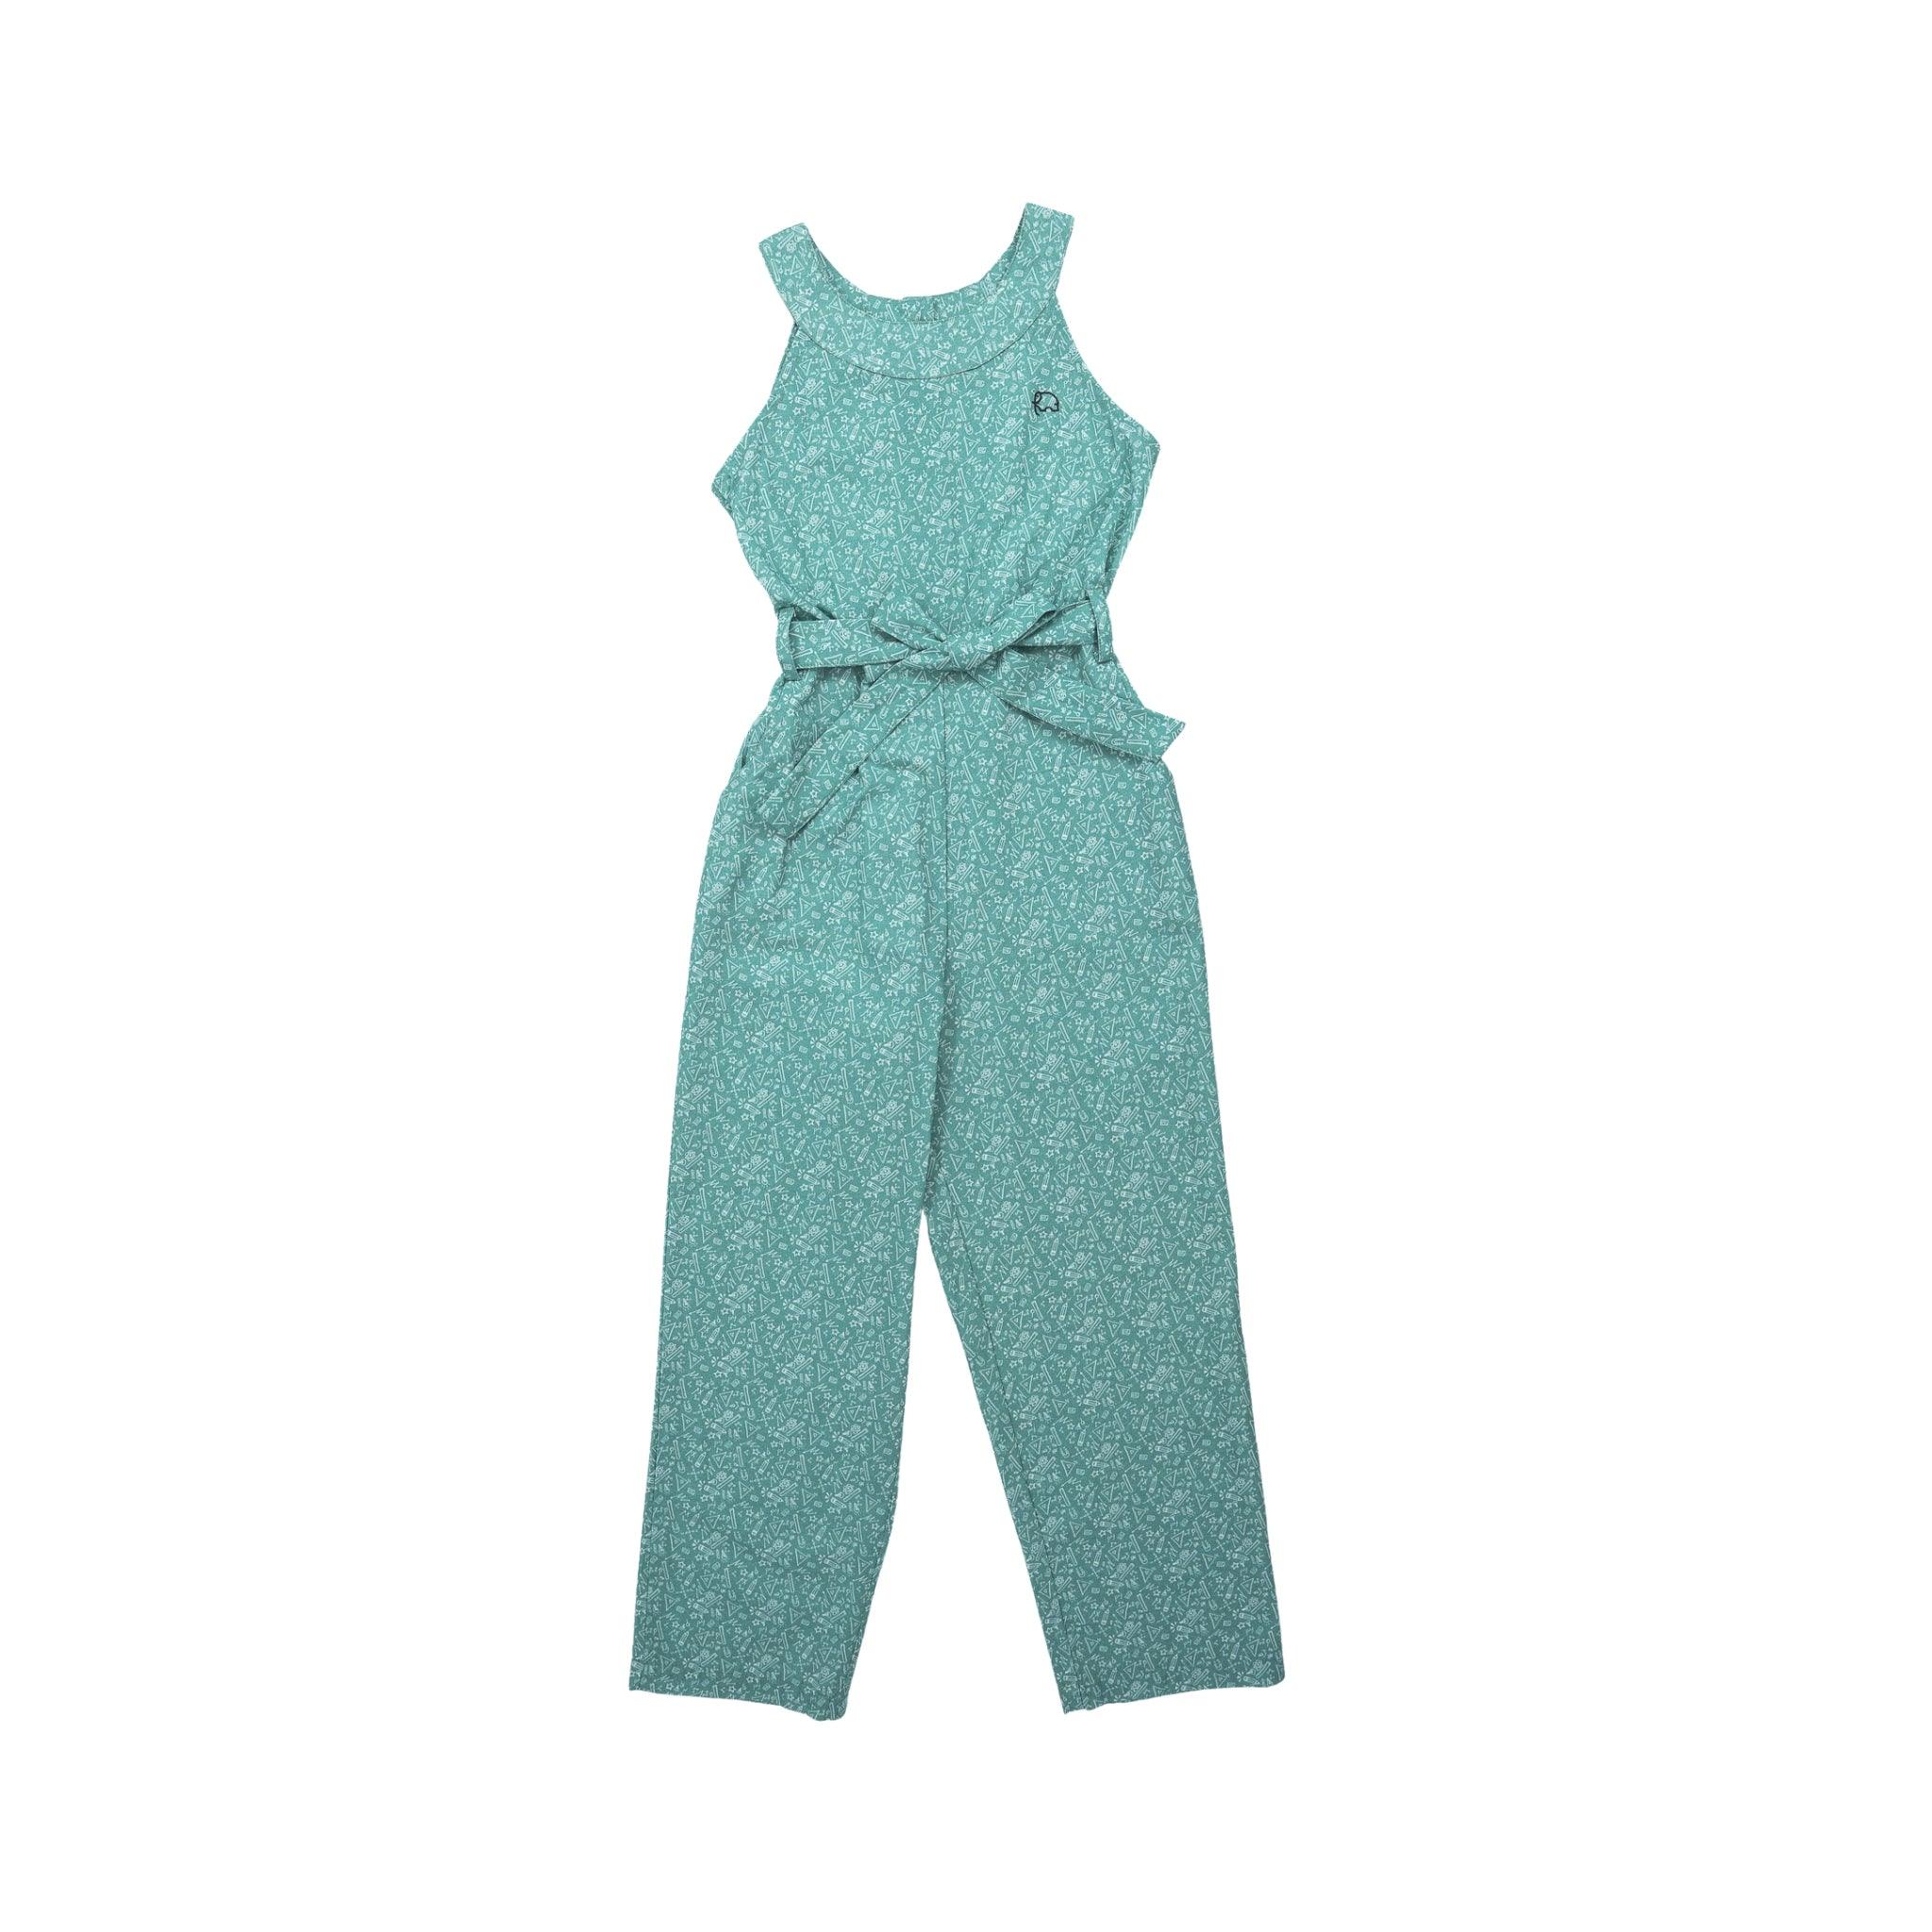 A Smoke Green Cotton Jumpsuit For Girls by Karee with a subtle pattern, featuring a sleeveless top, tie waist, and straight-leg pants, crafted from eco-friendly cotton and displayed flat against a white background.